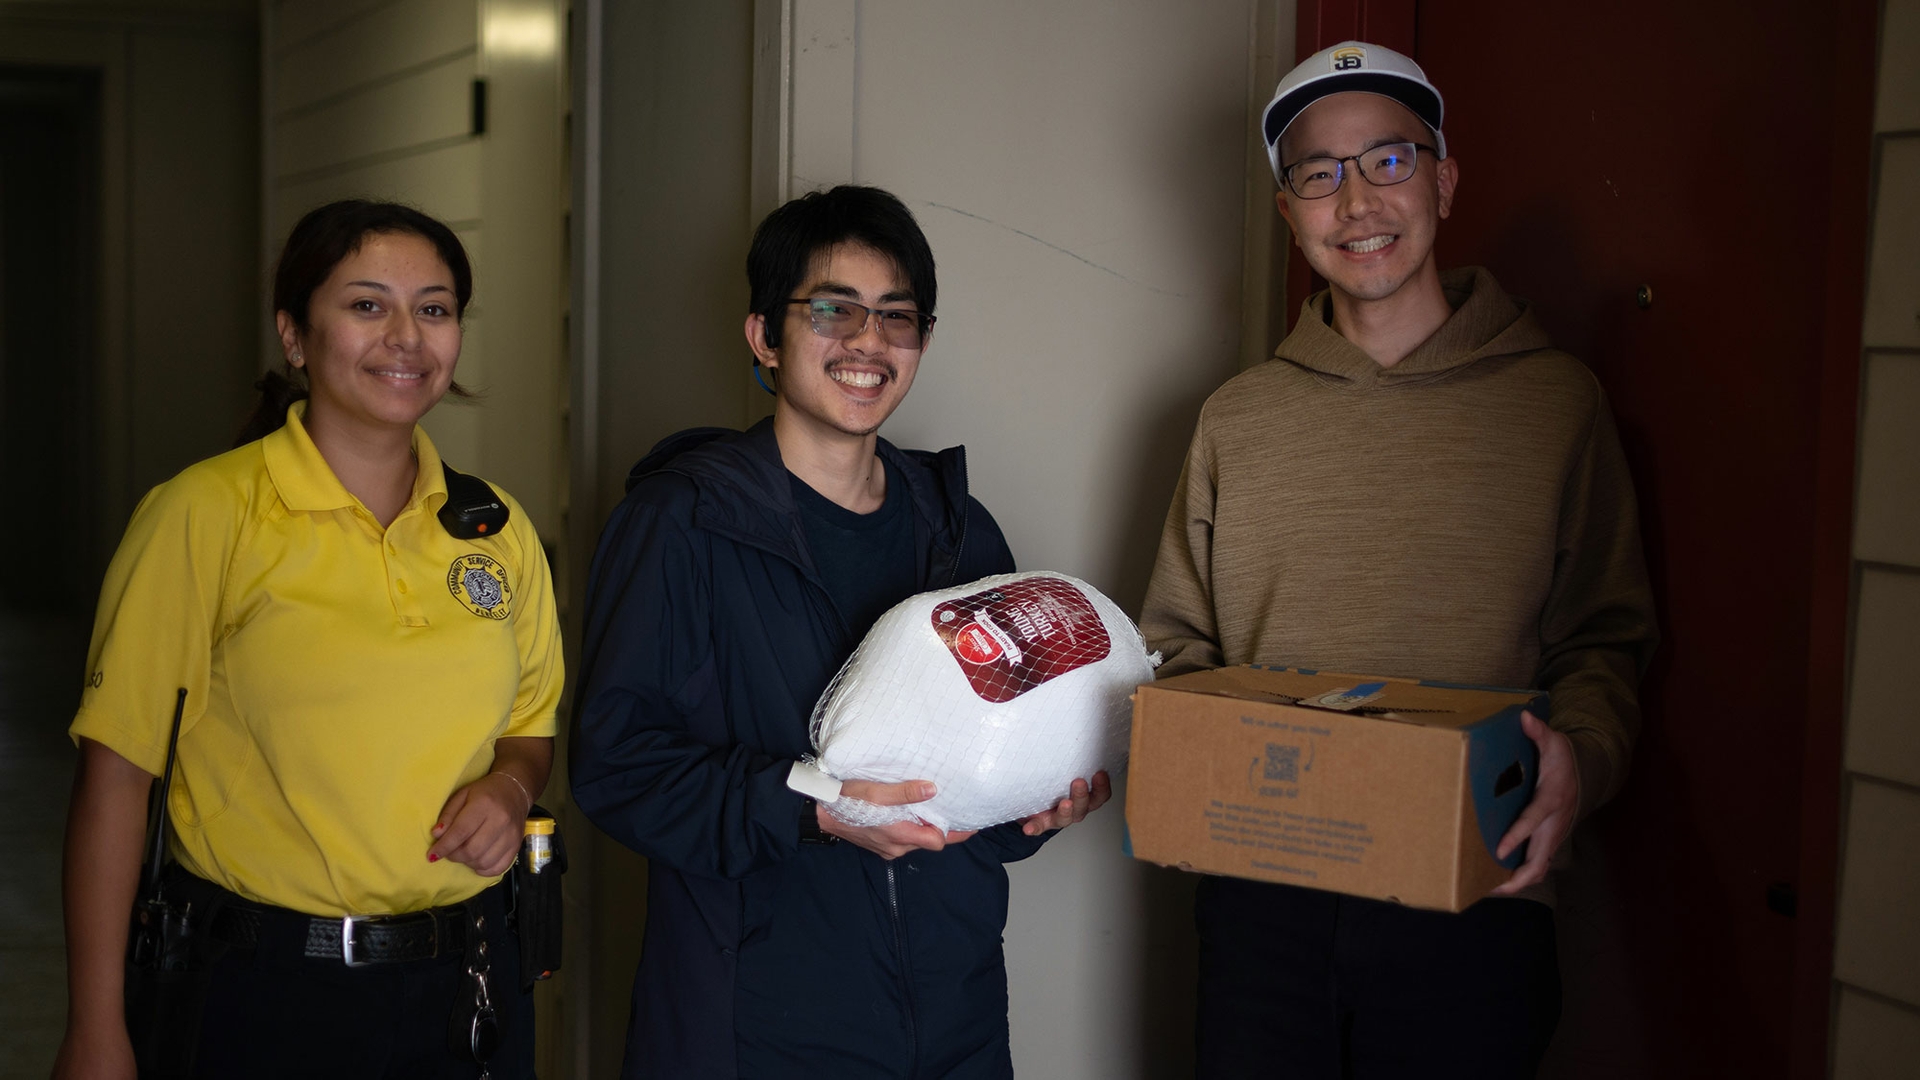 Three people stand beside the entryway to a residence. The person in the middle is holding a large frozen turkey, and the person next to them is holding a cardboard box.